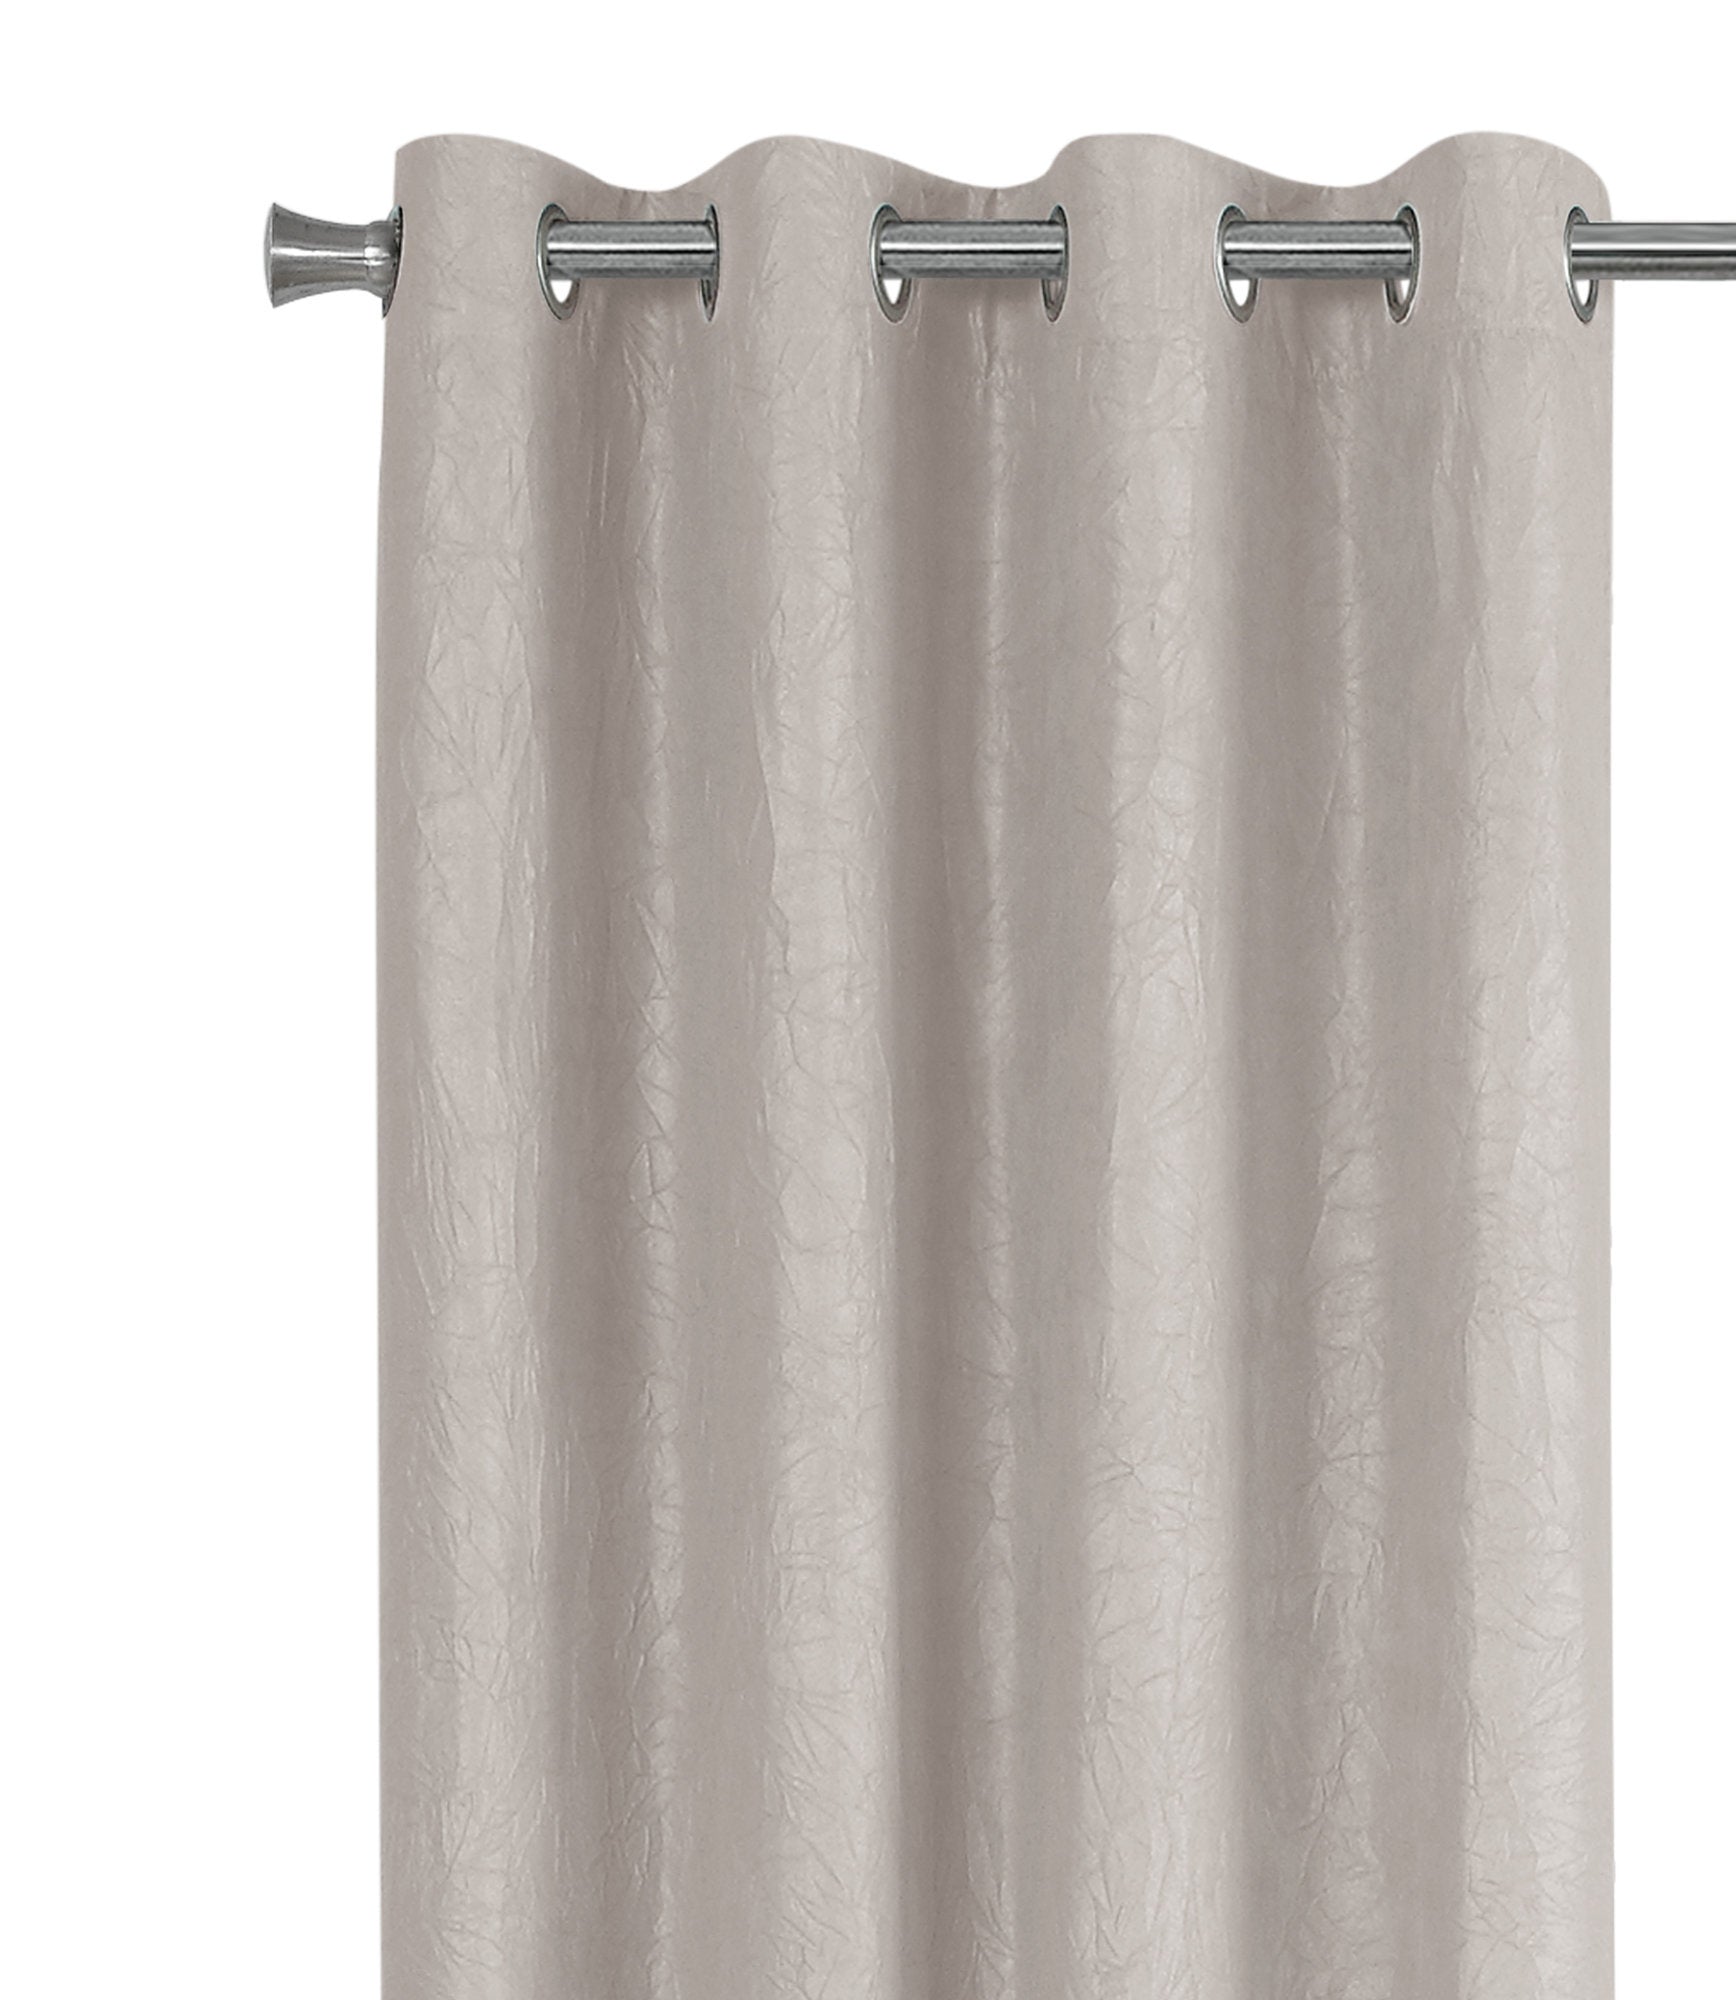 MN-909818    Curtain Panel, 2Pcs Set, 54"W X 95"L, Room Darkening, Grommet, Living Room, Bedroom, Kitchen, Micro Suede, Wrinkled  Finish, Polyester Room Darkening Fabric, Ivory, Contemporary, Modern